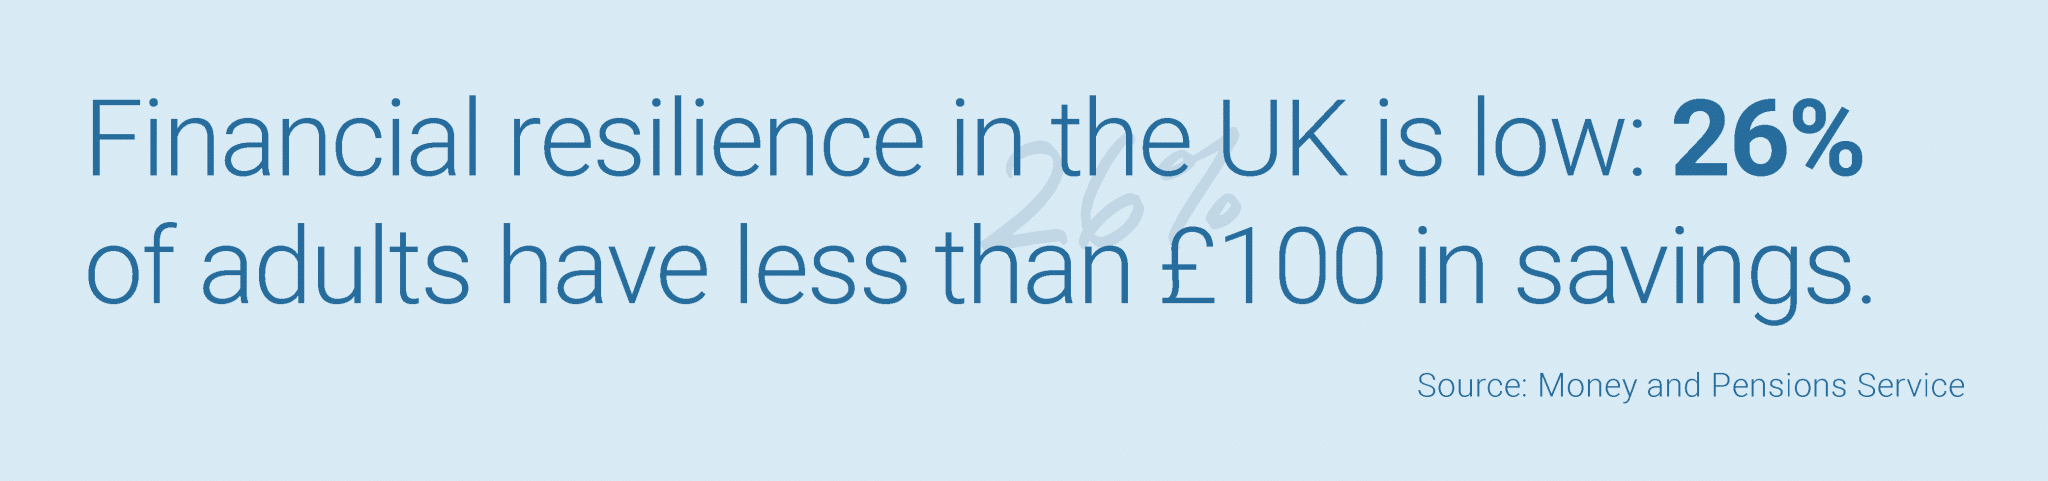 Financial resilience in the UK is low: 26% of adults have less than £100 in savings. Source: Money and Pensions Service